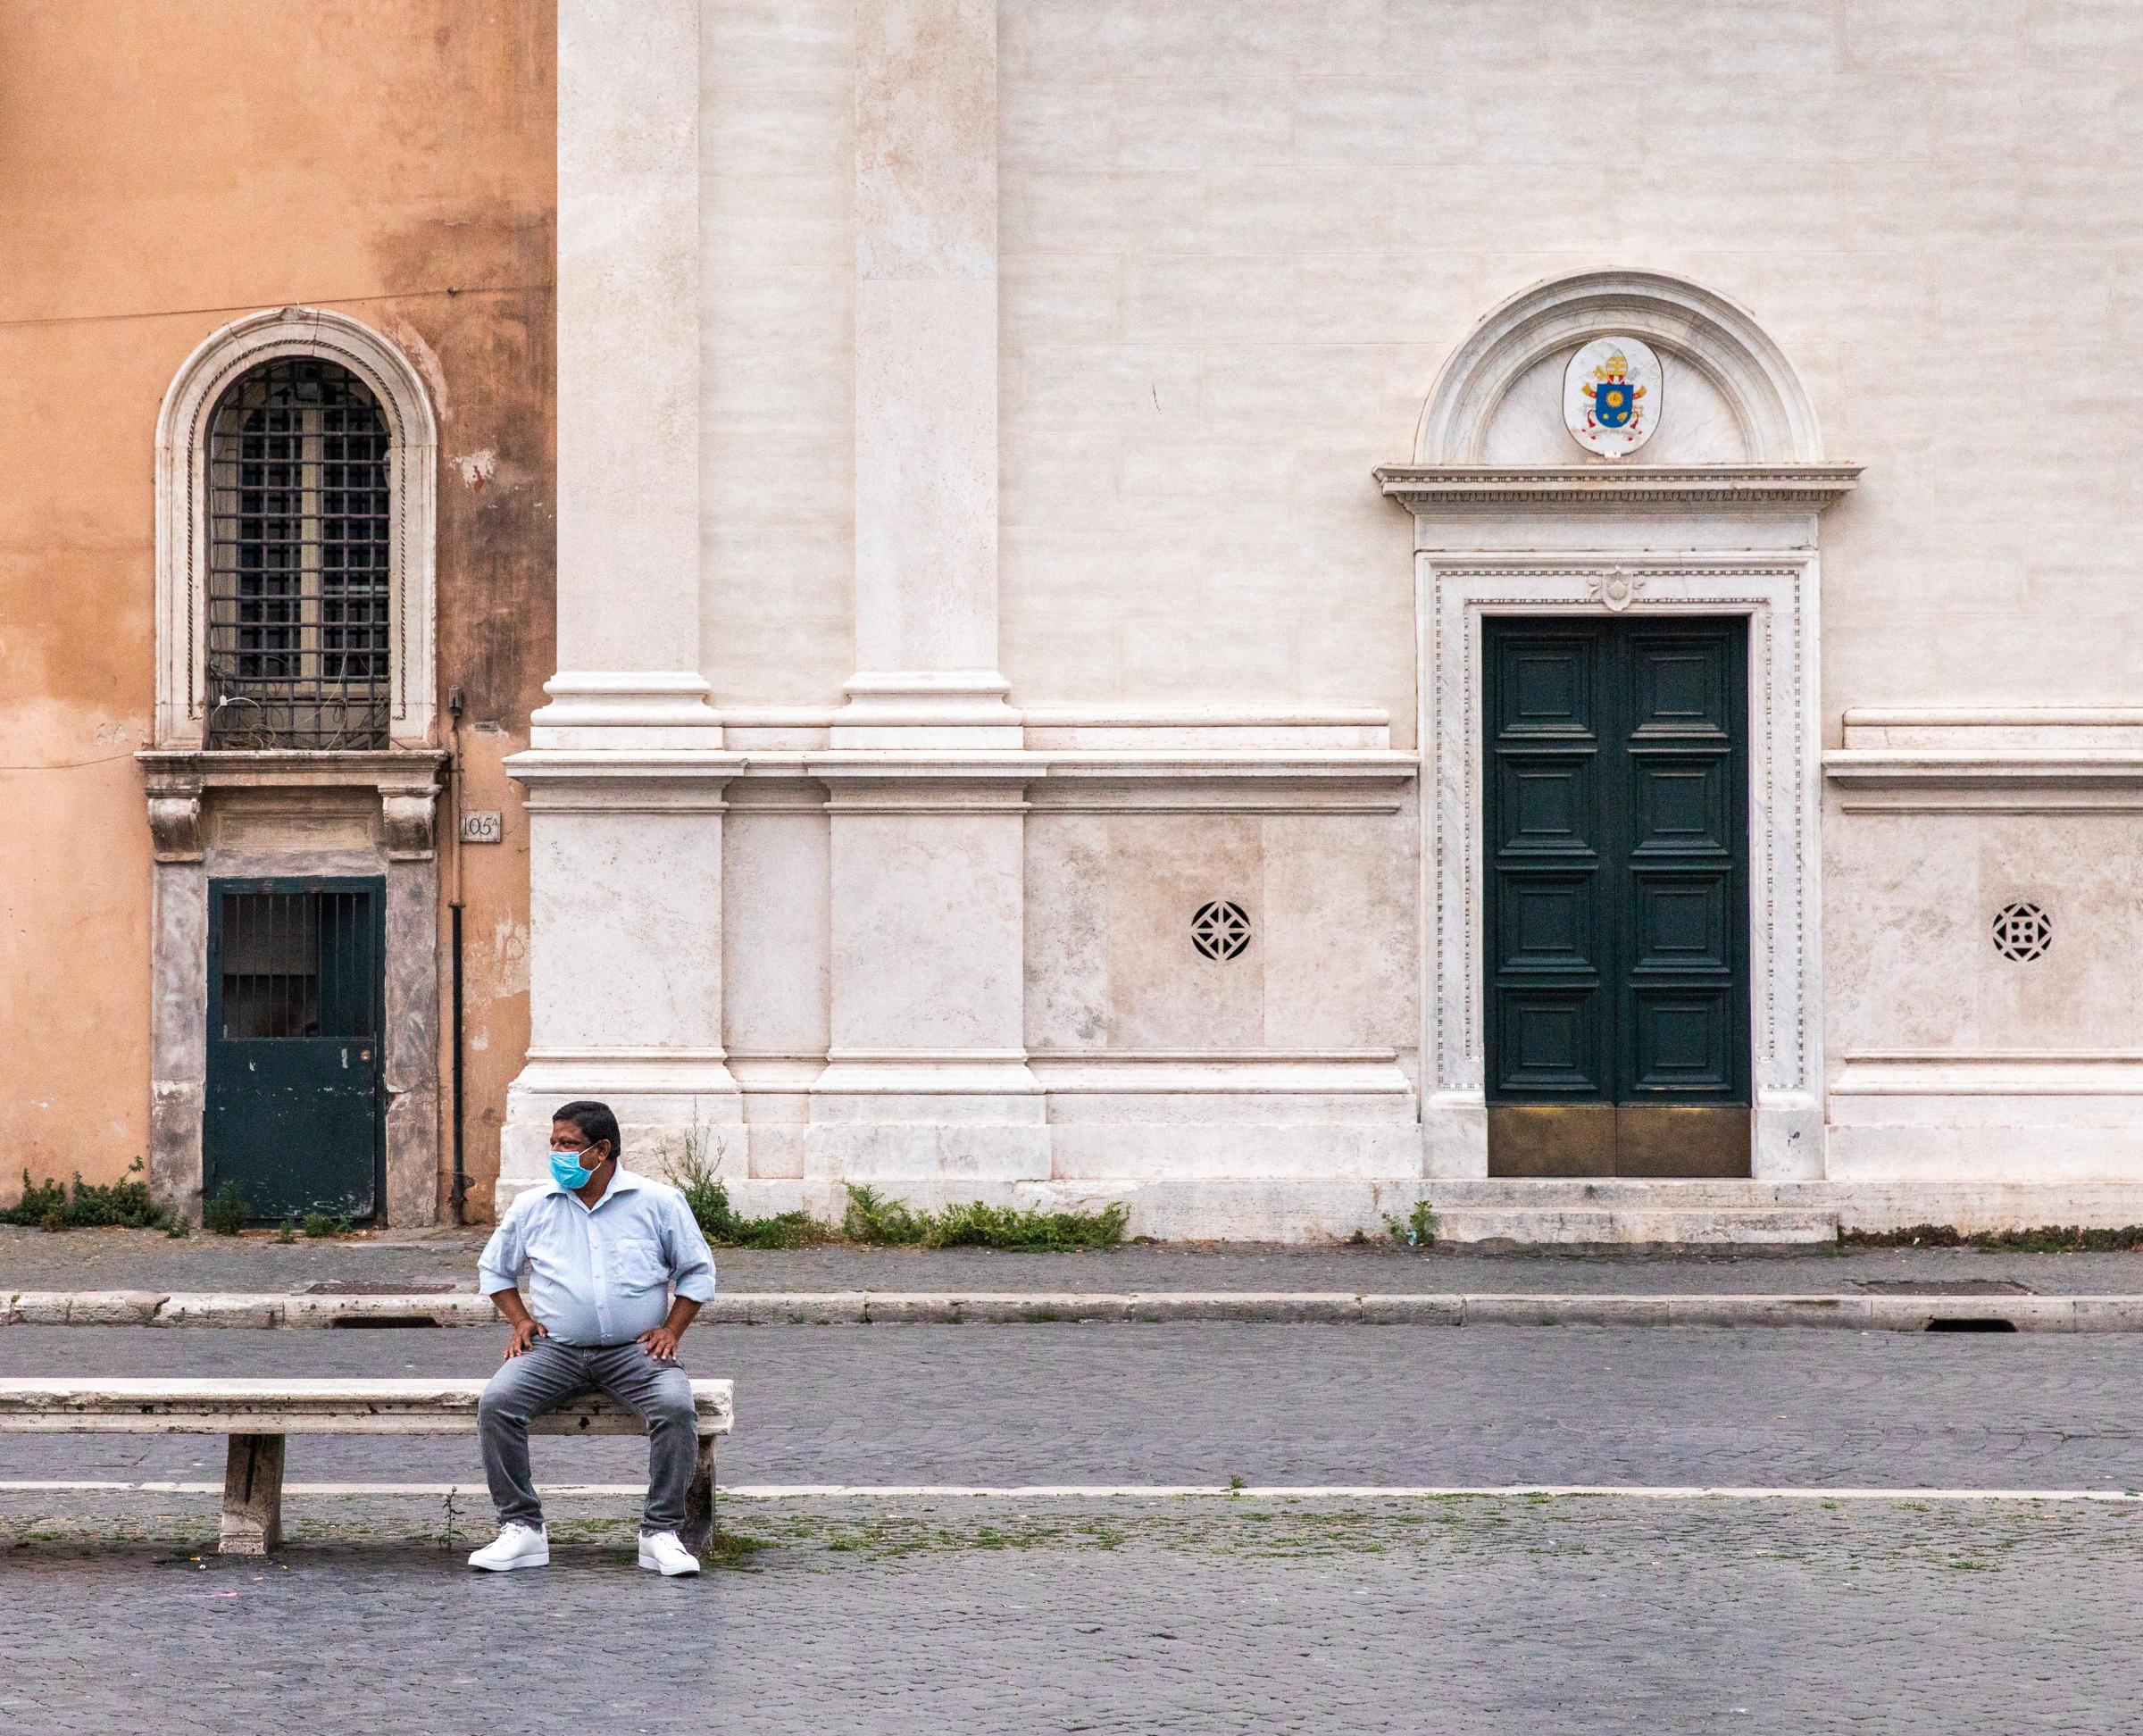 That Bad Boy Rome - A First-timer's Perspective - Rome is still one of the more cautious European city when it comes to Covid regulations. The city...